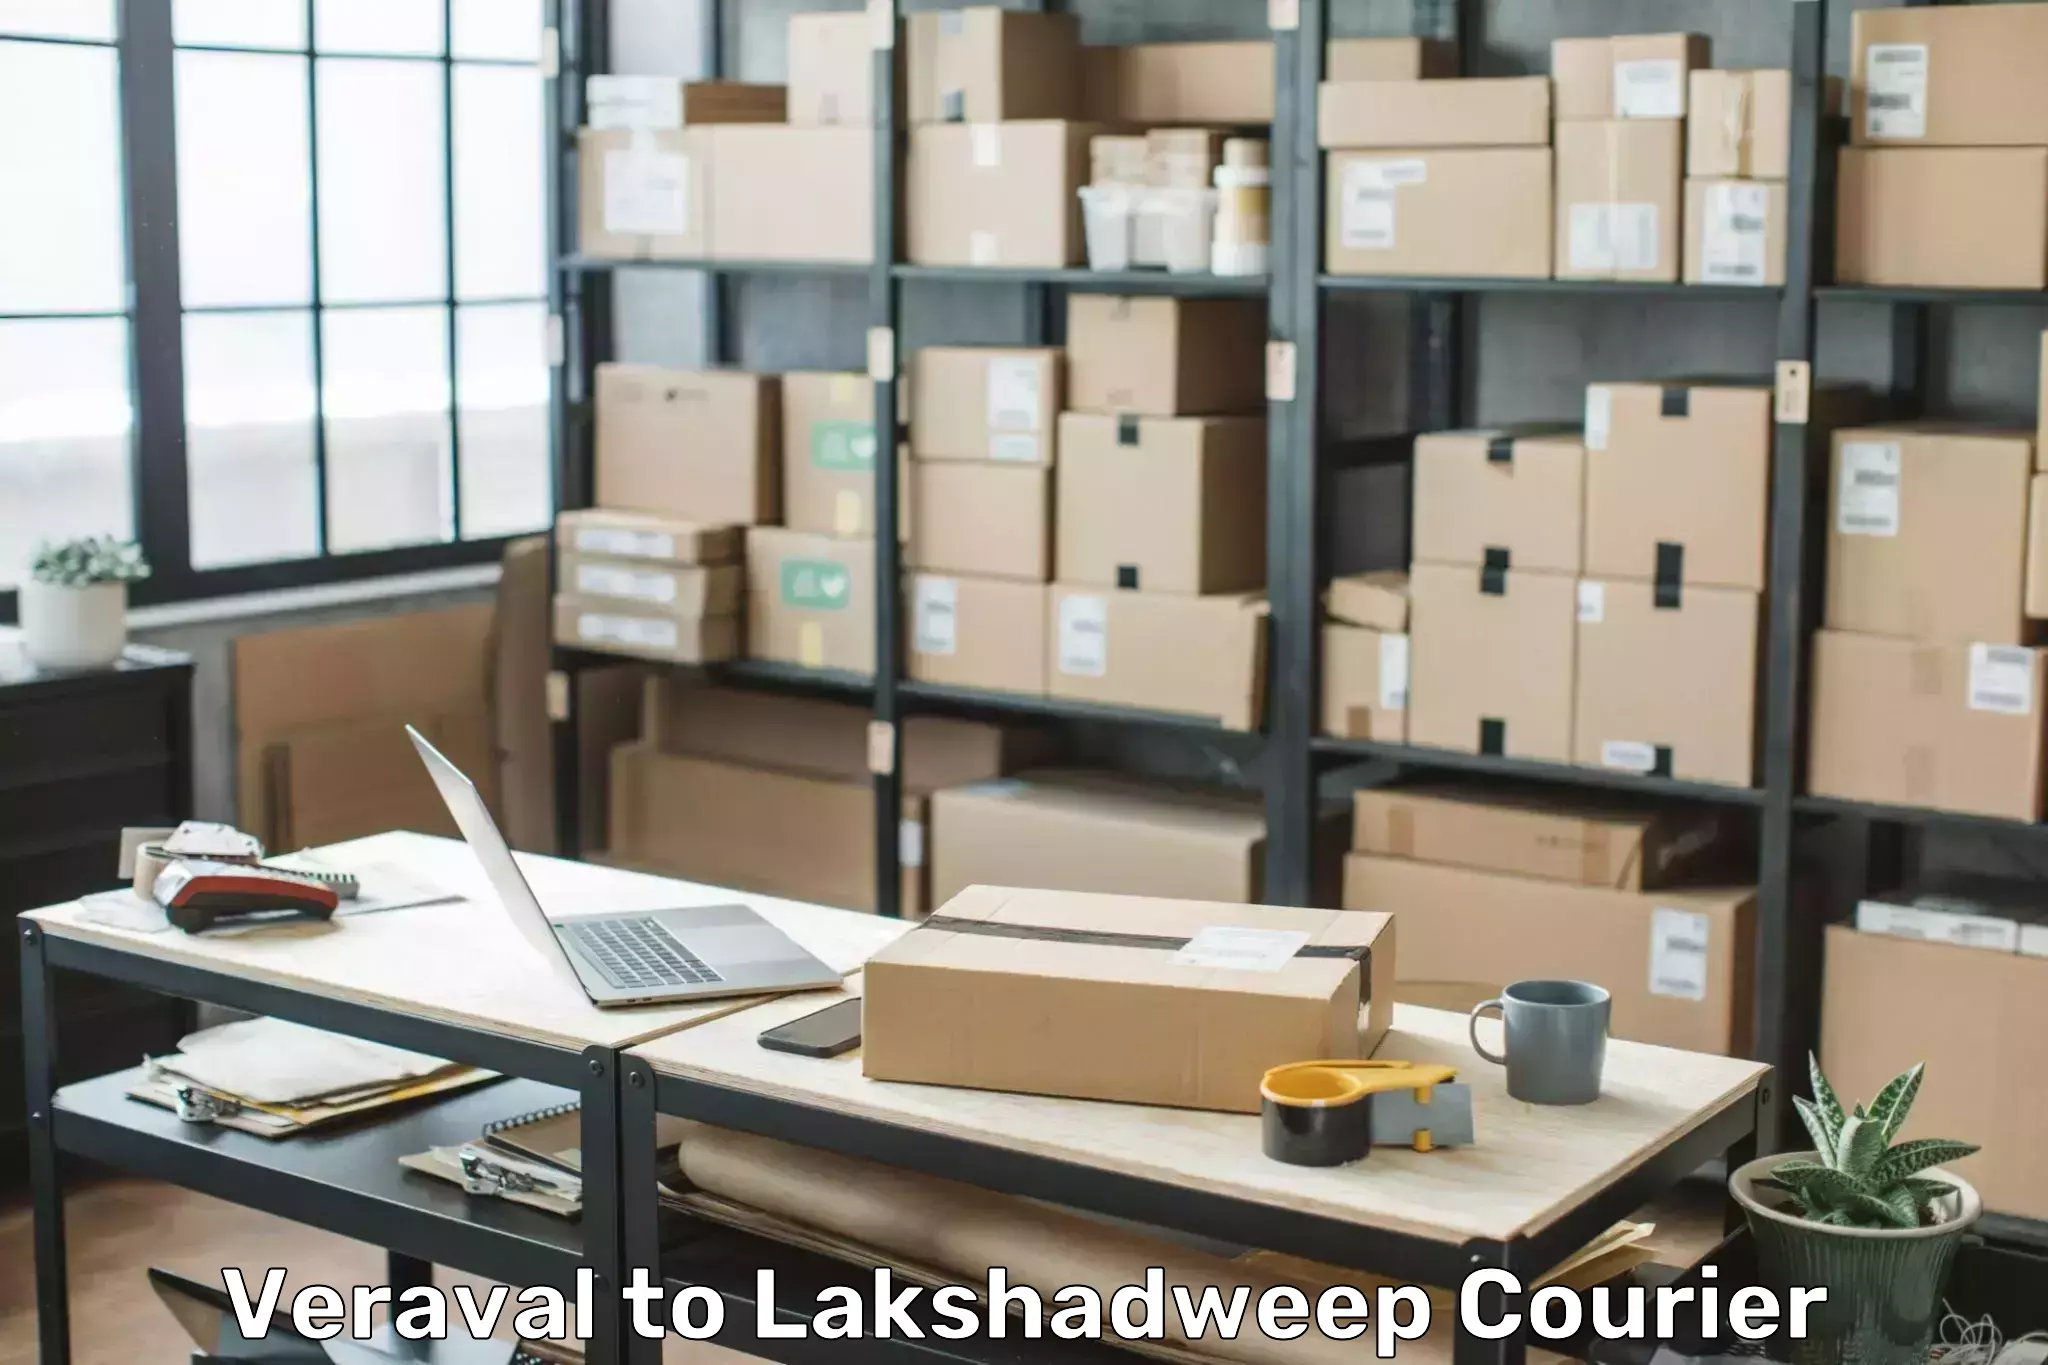 Express luggage delivery Veraval to Lakshadweep